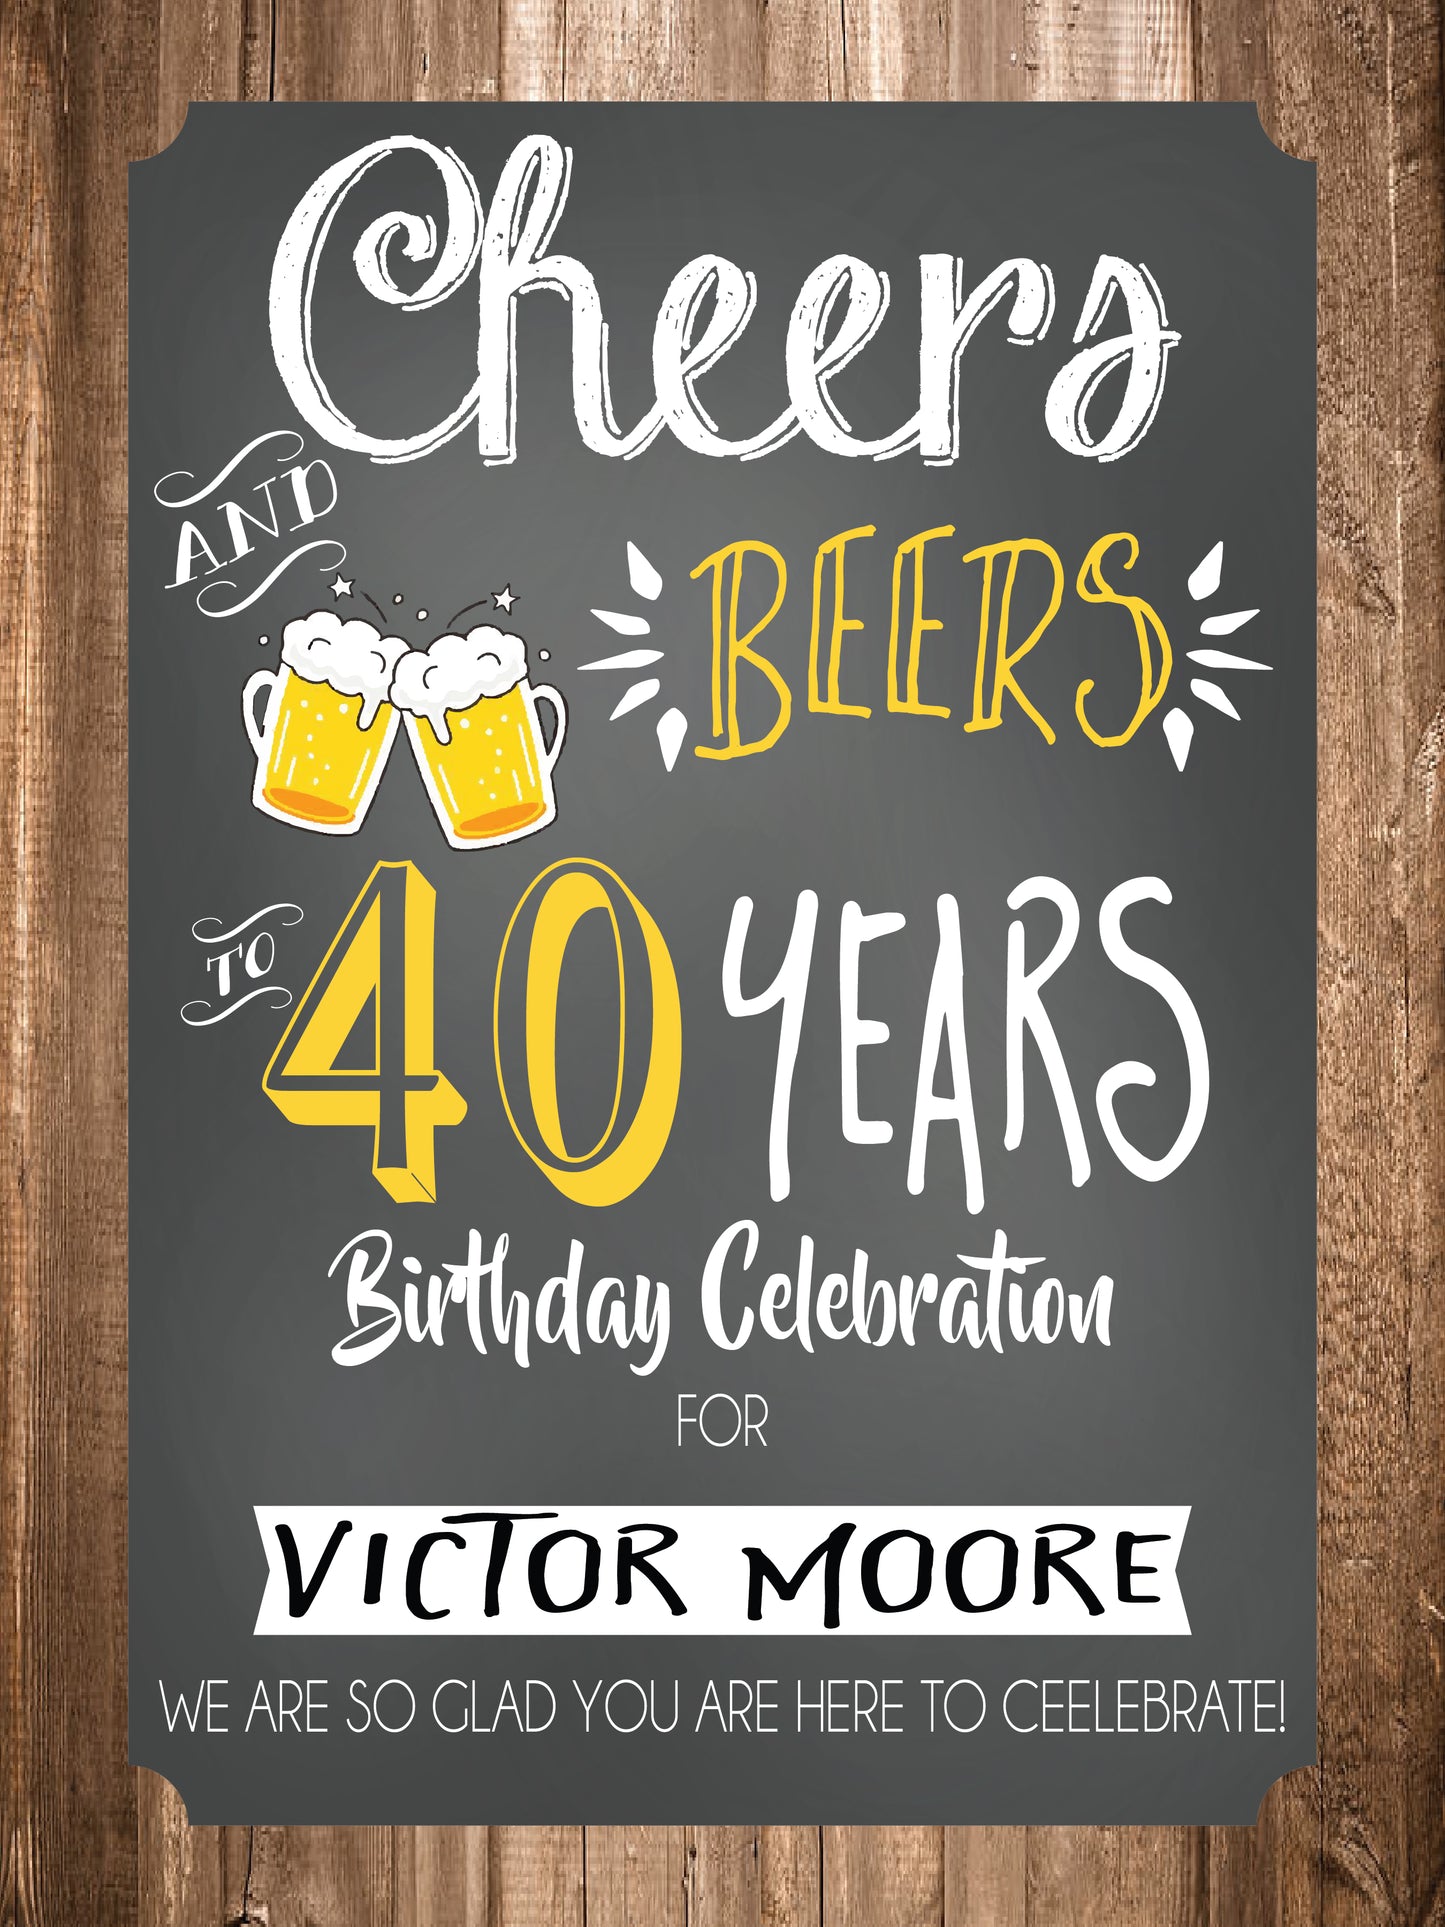 Cheers and beers adult birthday party signage